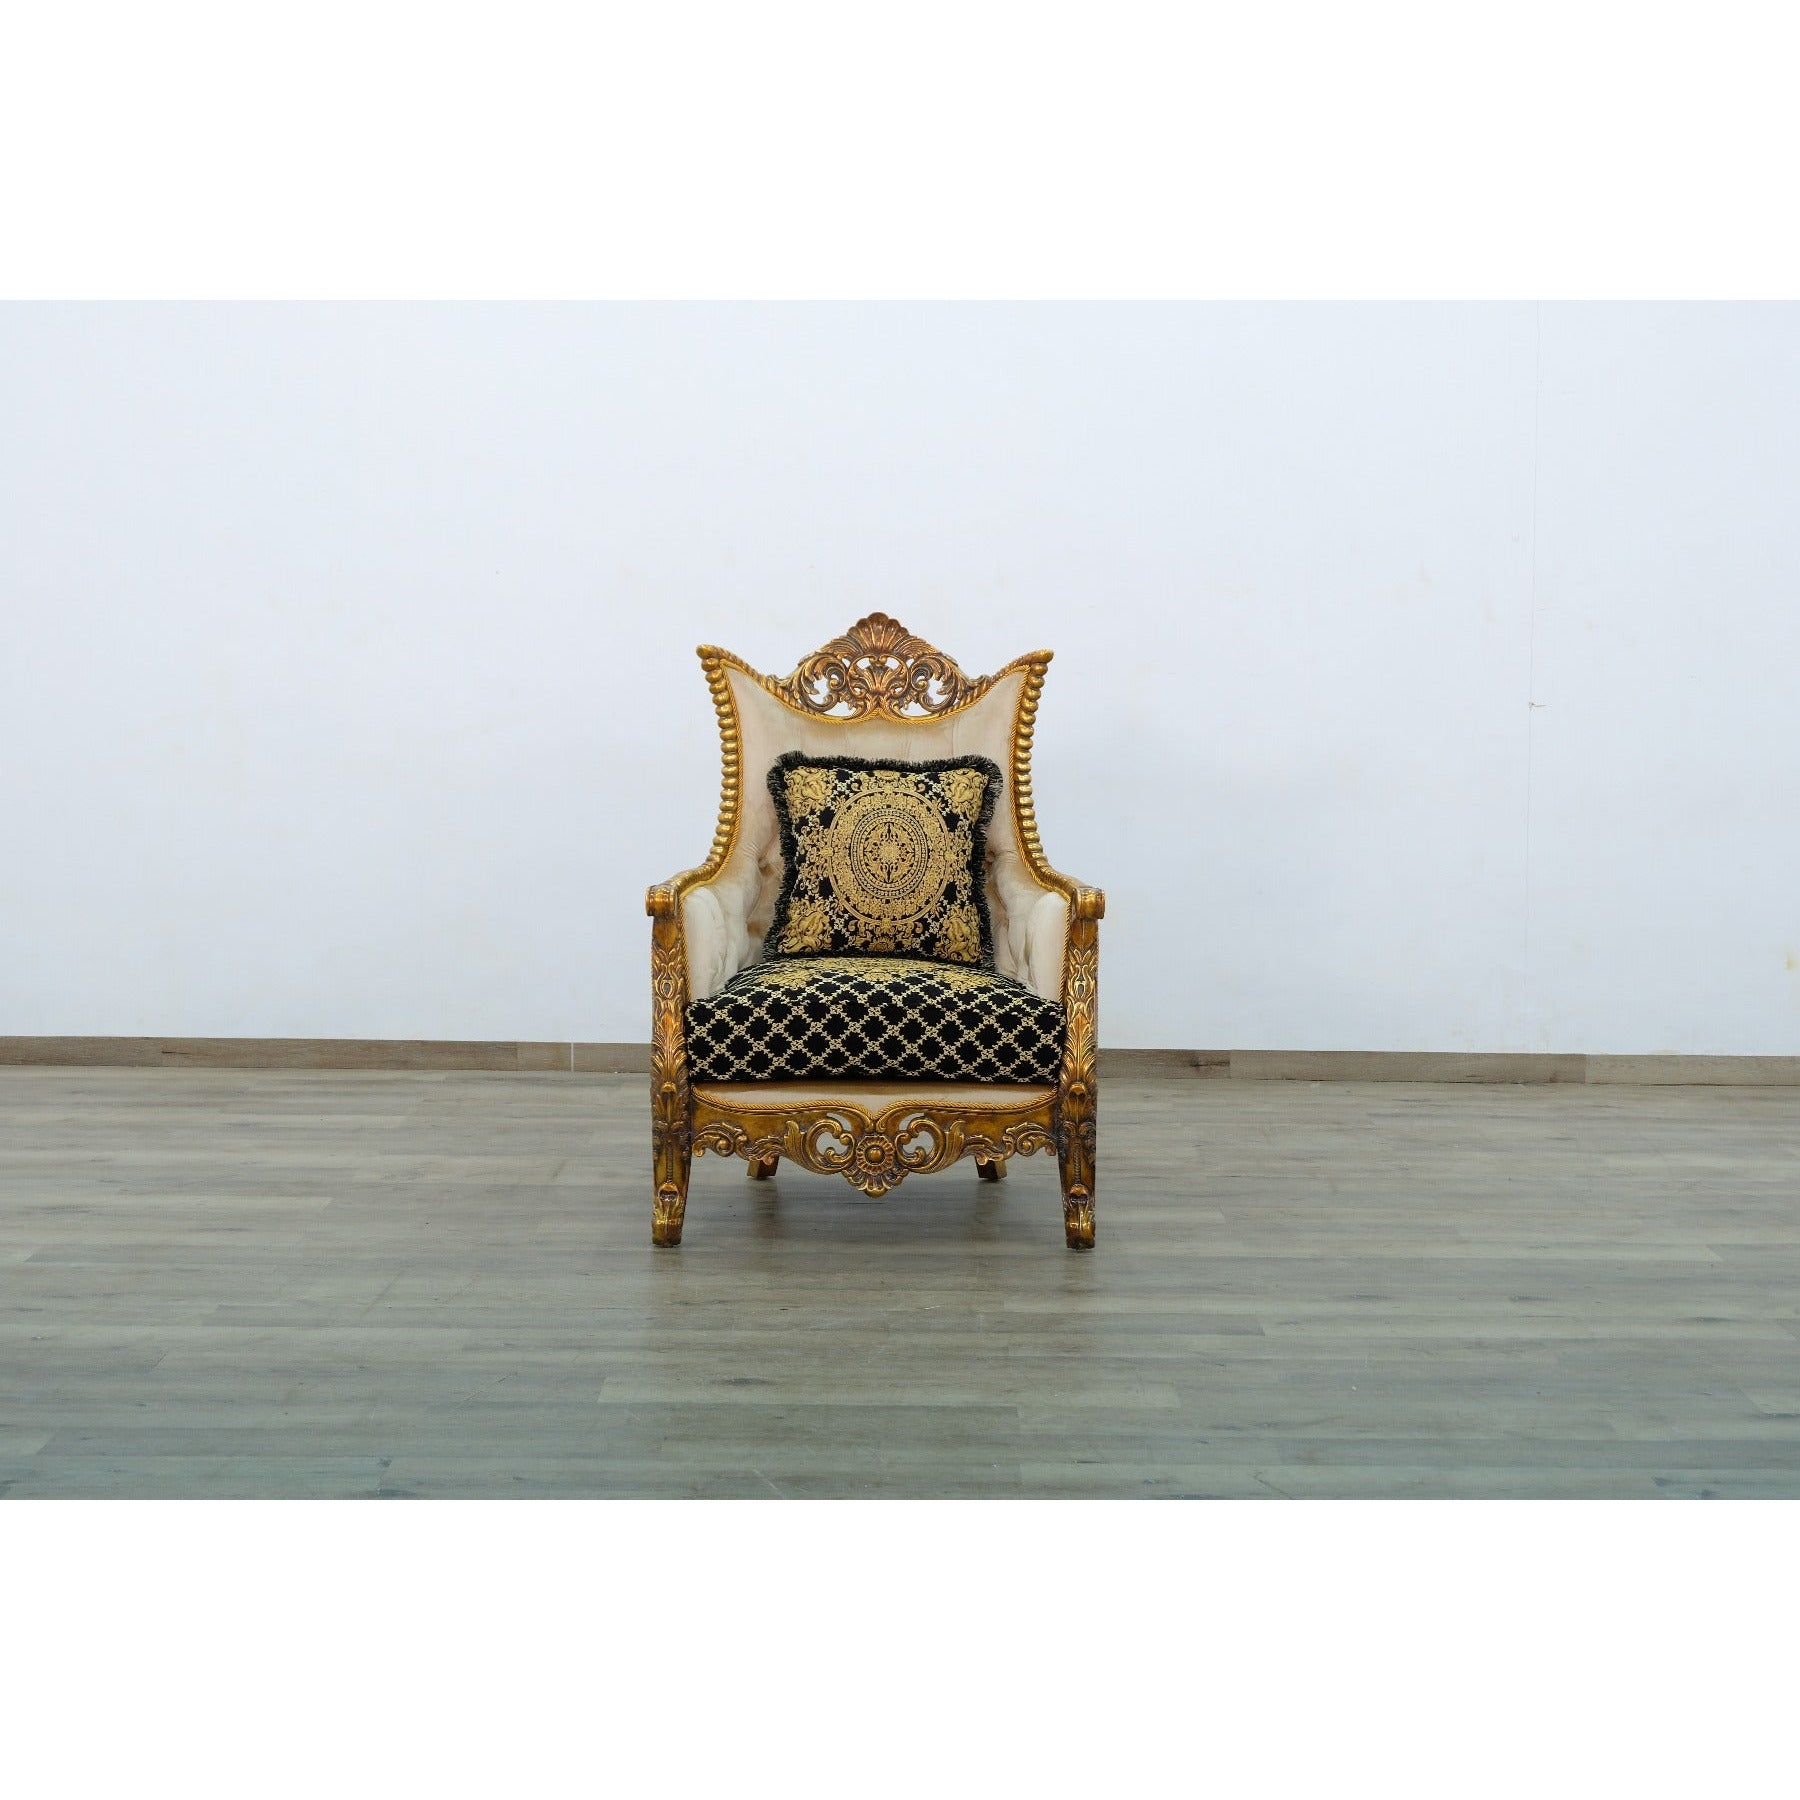 European Furniture - Maggiolini II Chair in Black and Gold - 31059-C - New Star Living